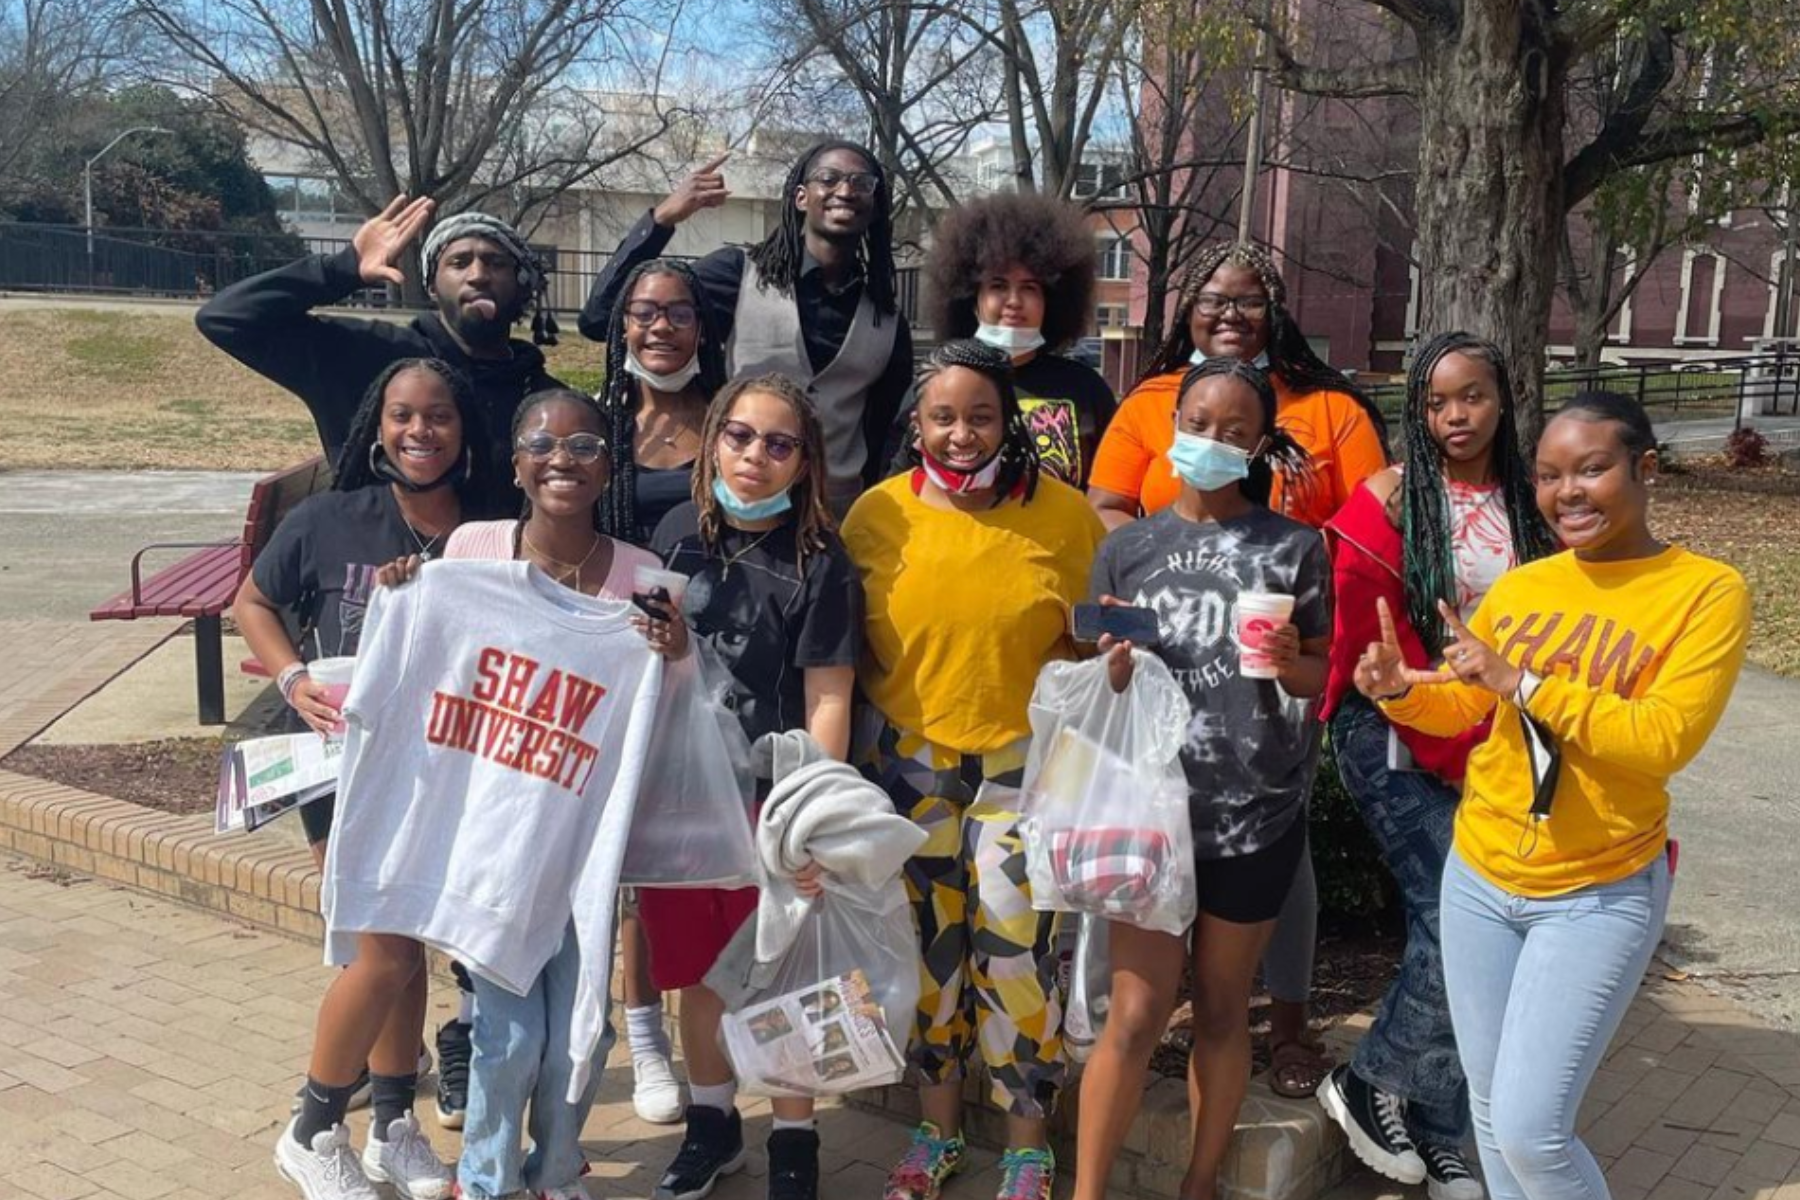 Denver East High School’s Black Women’s Unity Club standing close together and posing for a photo. They are standing outside near large trees.